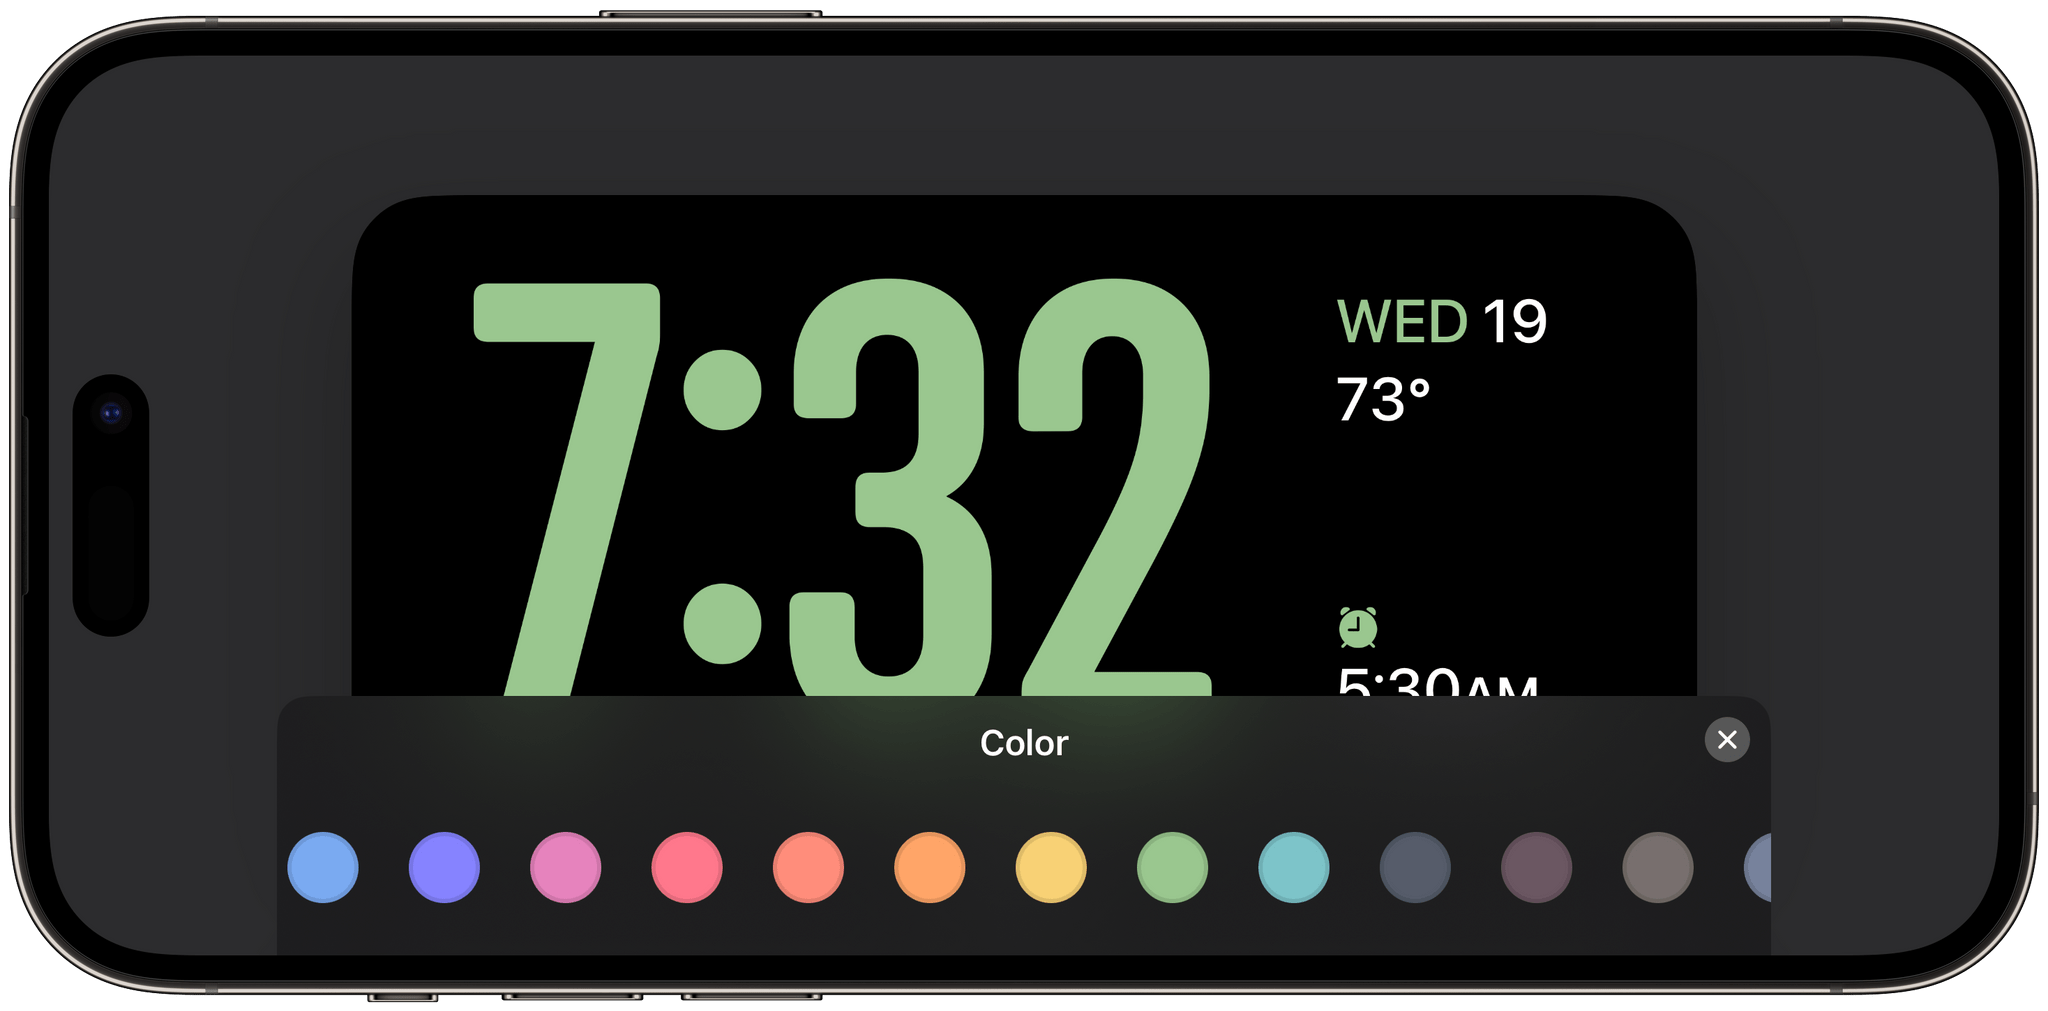 Changing the clock's accent color.